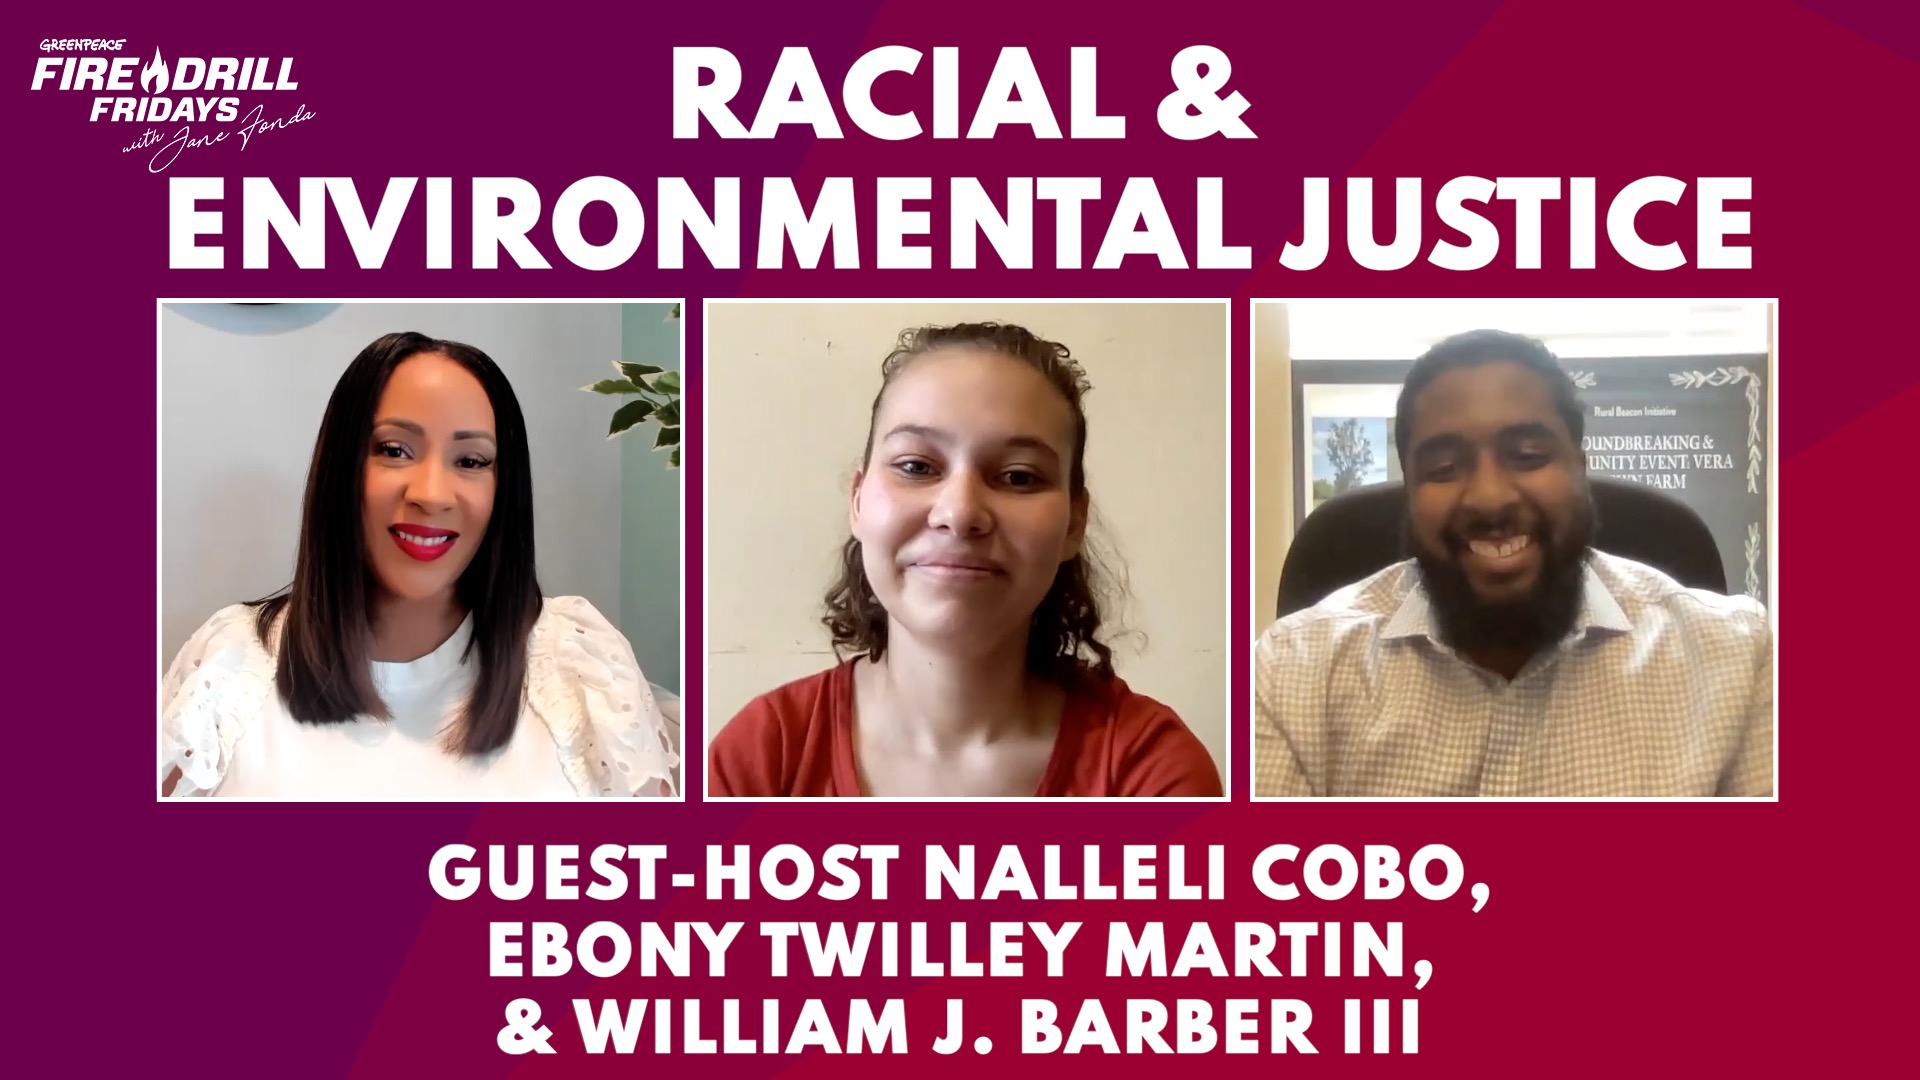 Watch Ebony Twilley Martin & William J. Barber III on the Interconnectedness of Racial & Environmental Justice